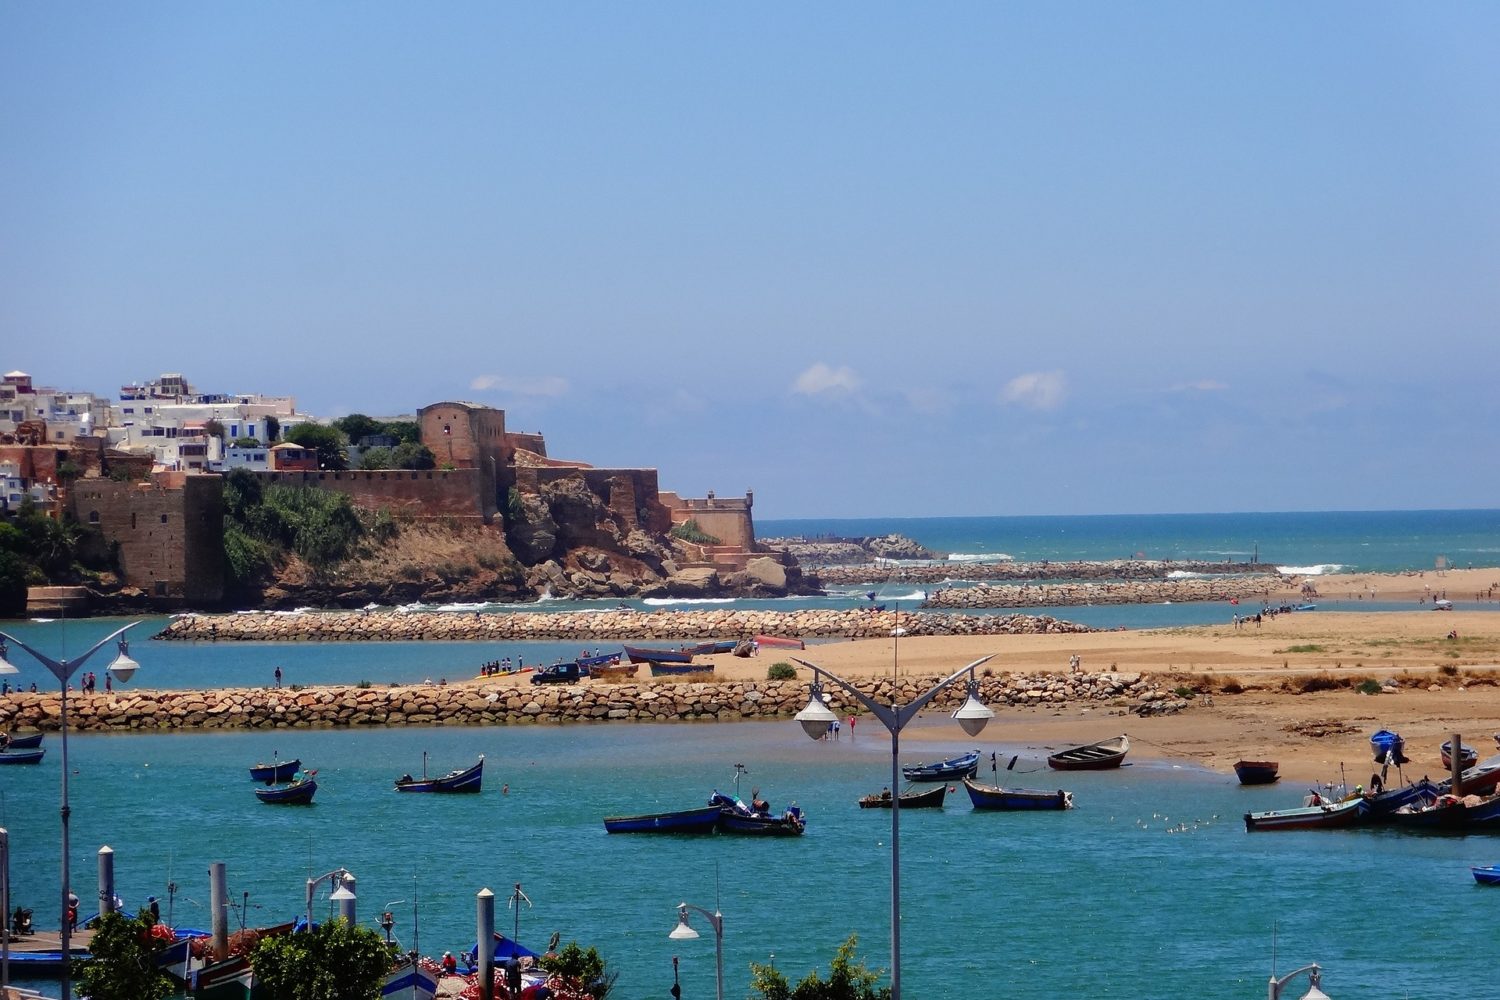 Explore Rabat in Complete Freedom with Our Car Rental Service